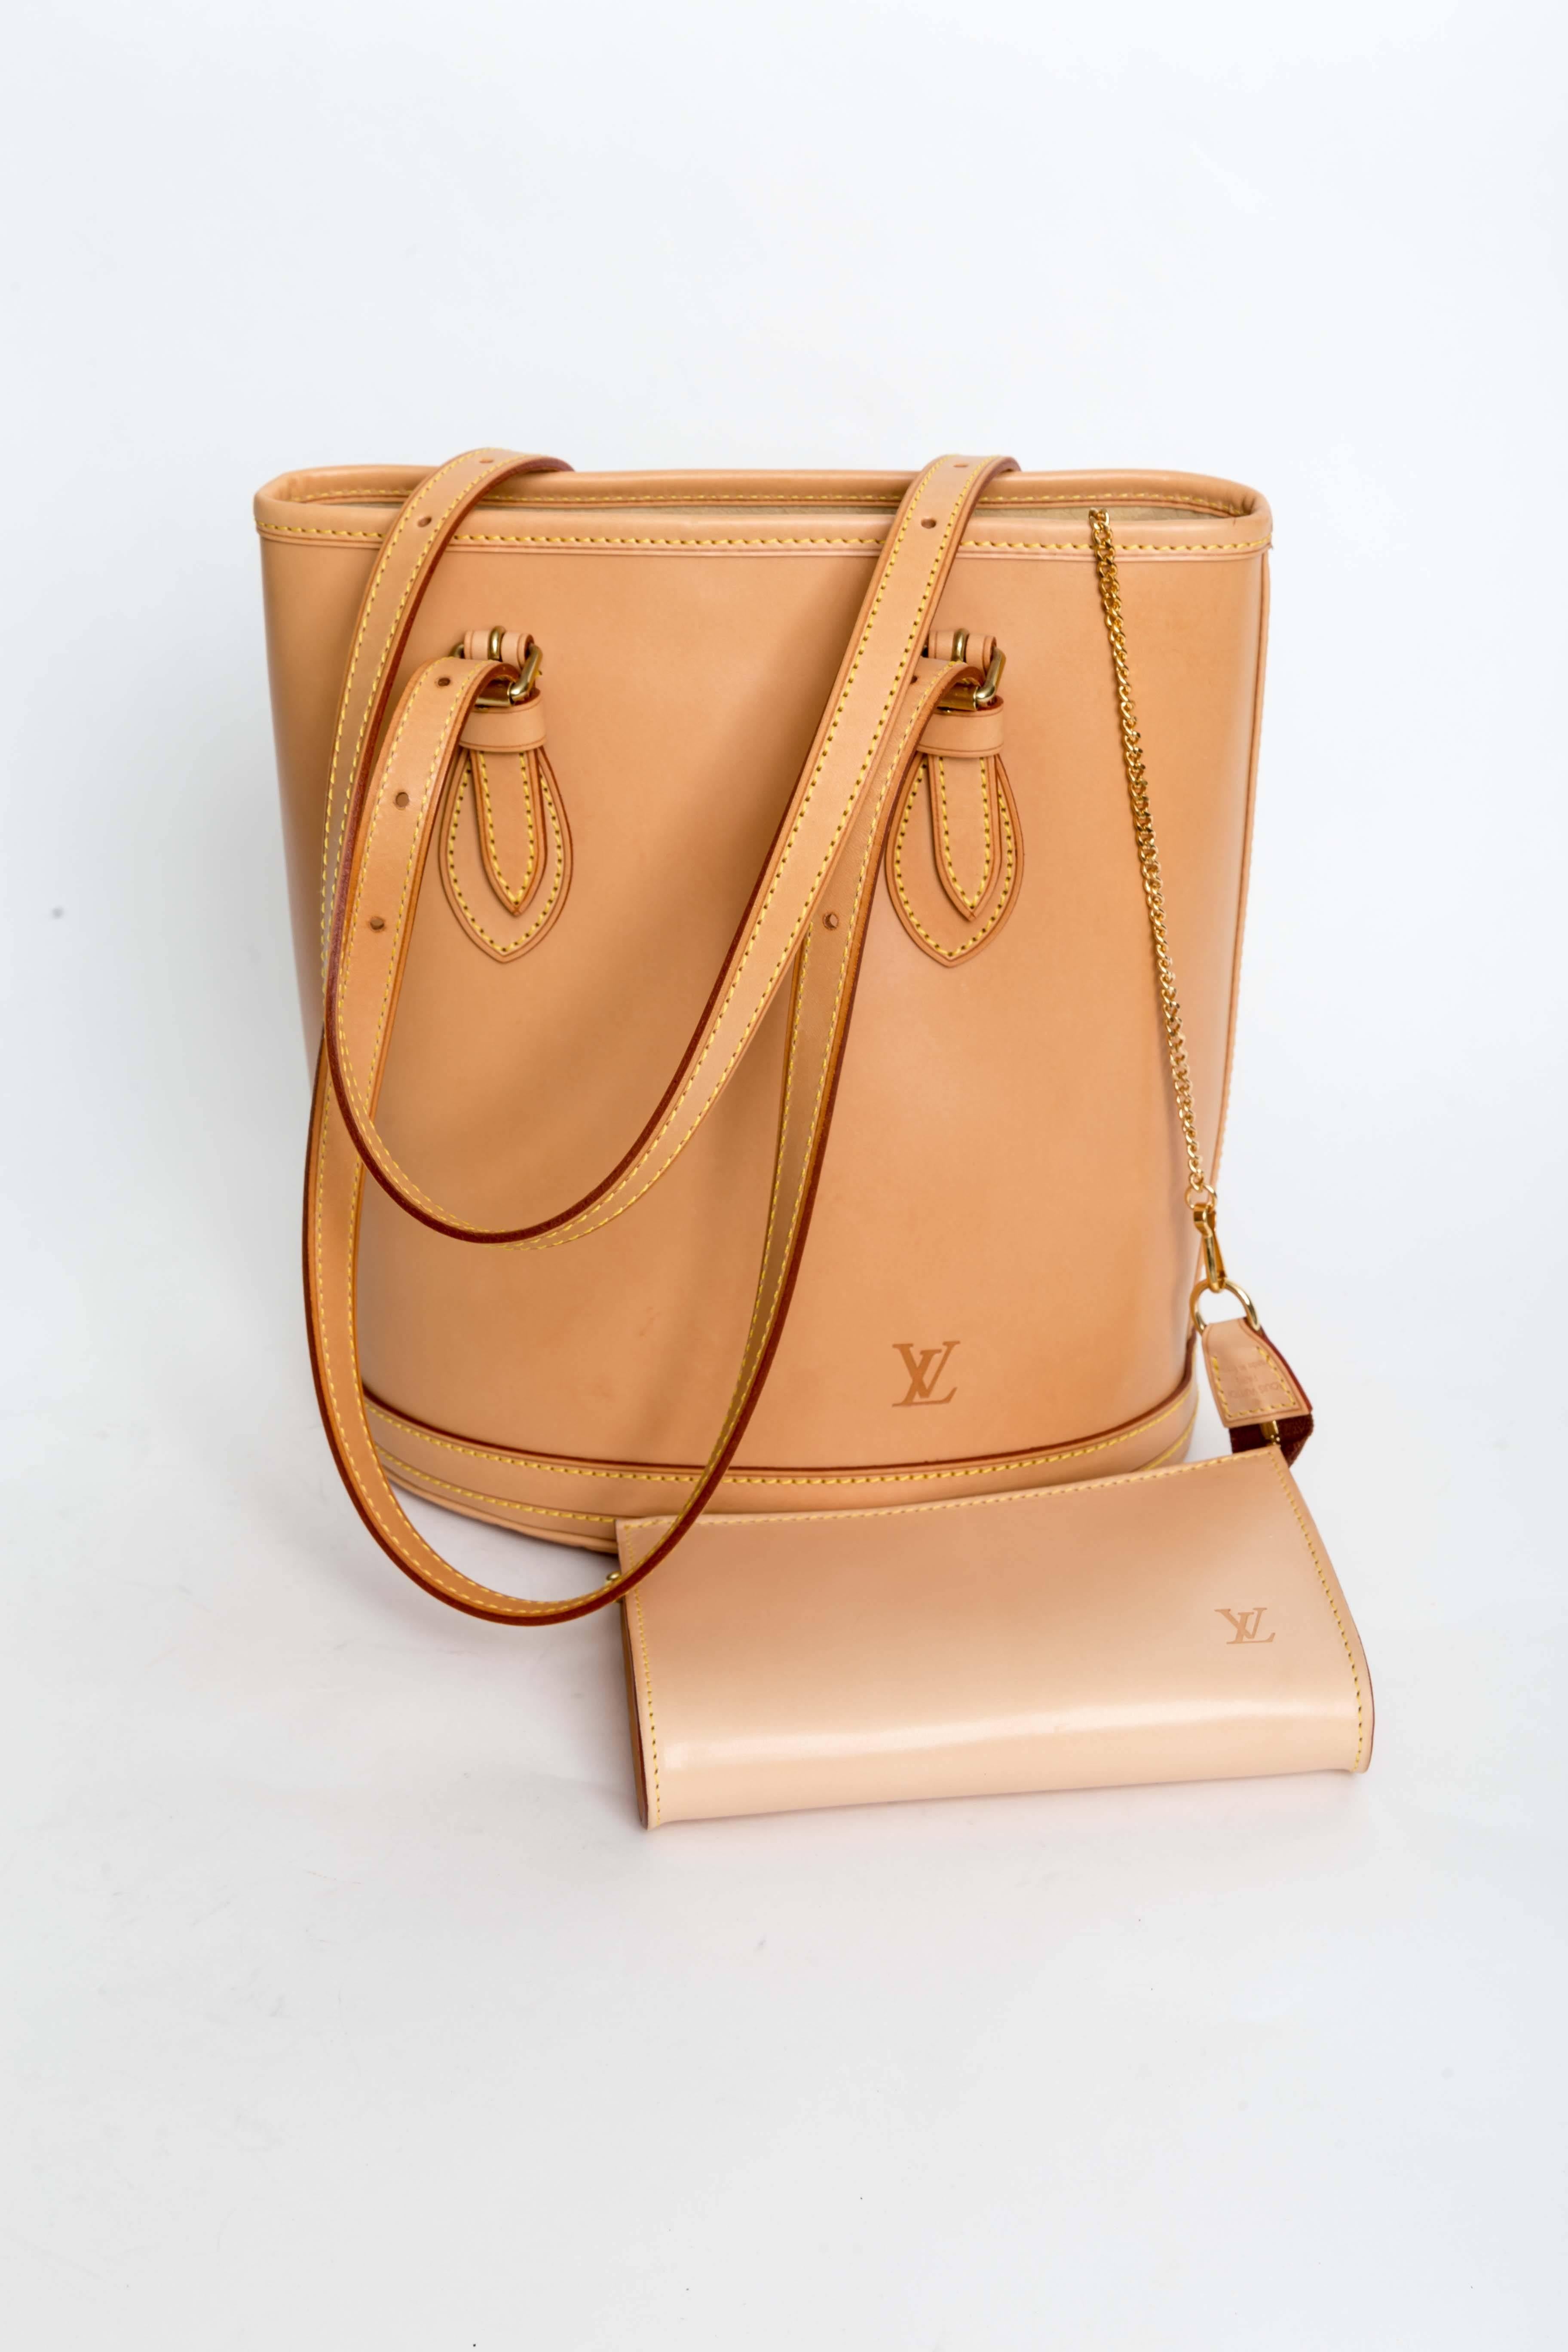  Louis Vuitton Petit Bucket Bag in Tan Vachetta Leather features  brass hardware, dual adjustable shoulder straps, yellow contrast stitching throughout, embossed logo embellishment at front, beige Alcantara interior, dual pockets at interior walls;